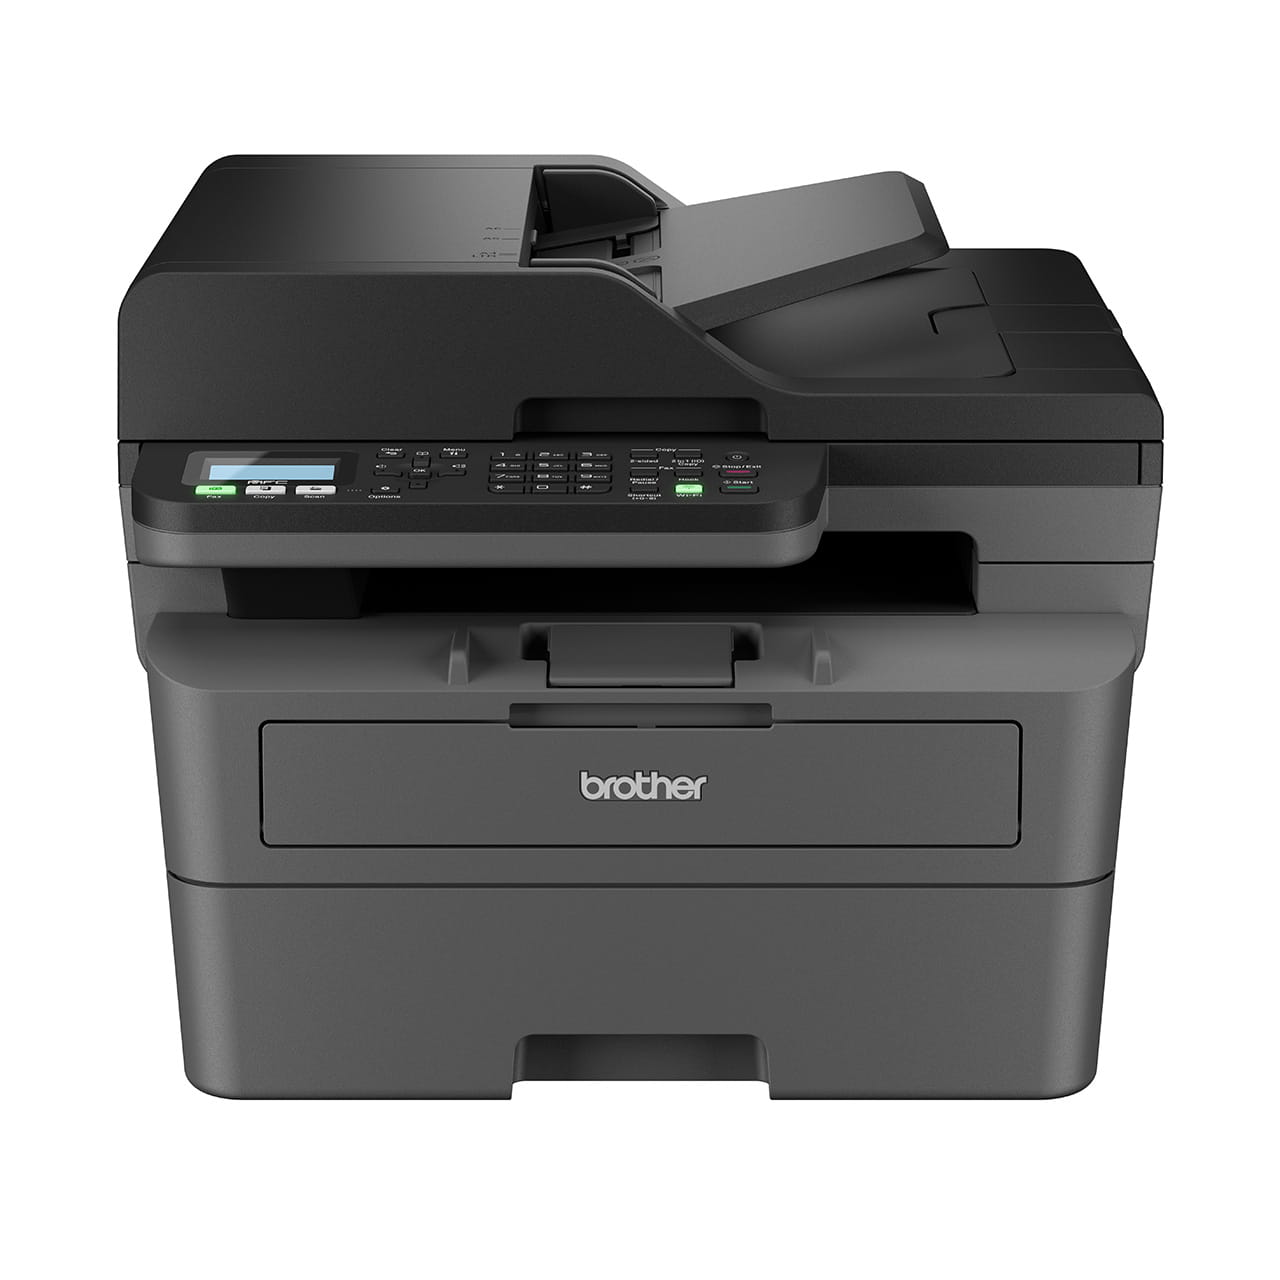 Brother MFC-L2800DW Mono Laser Printer Front View